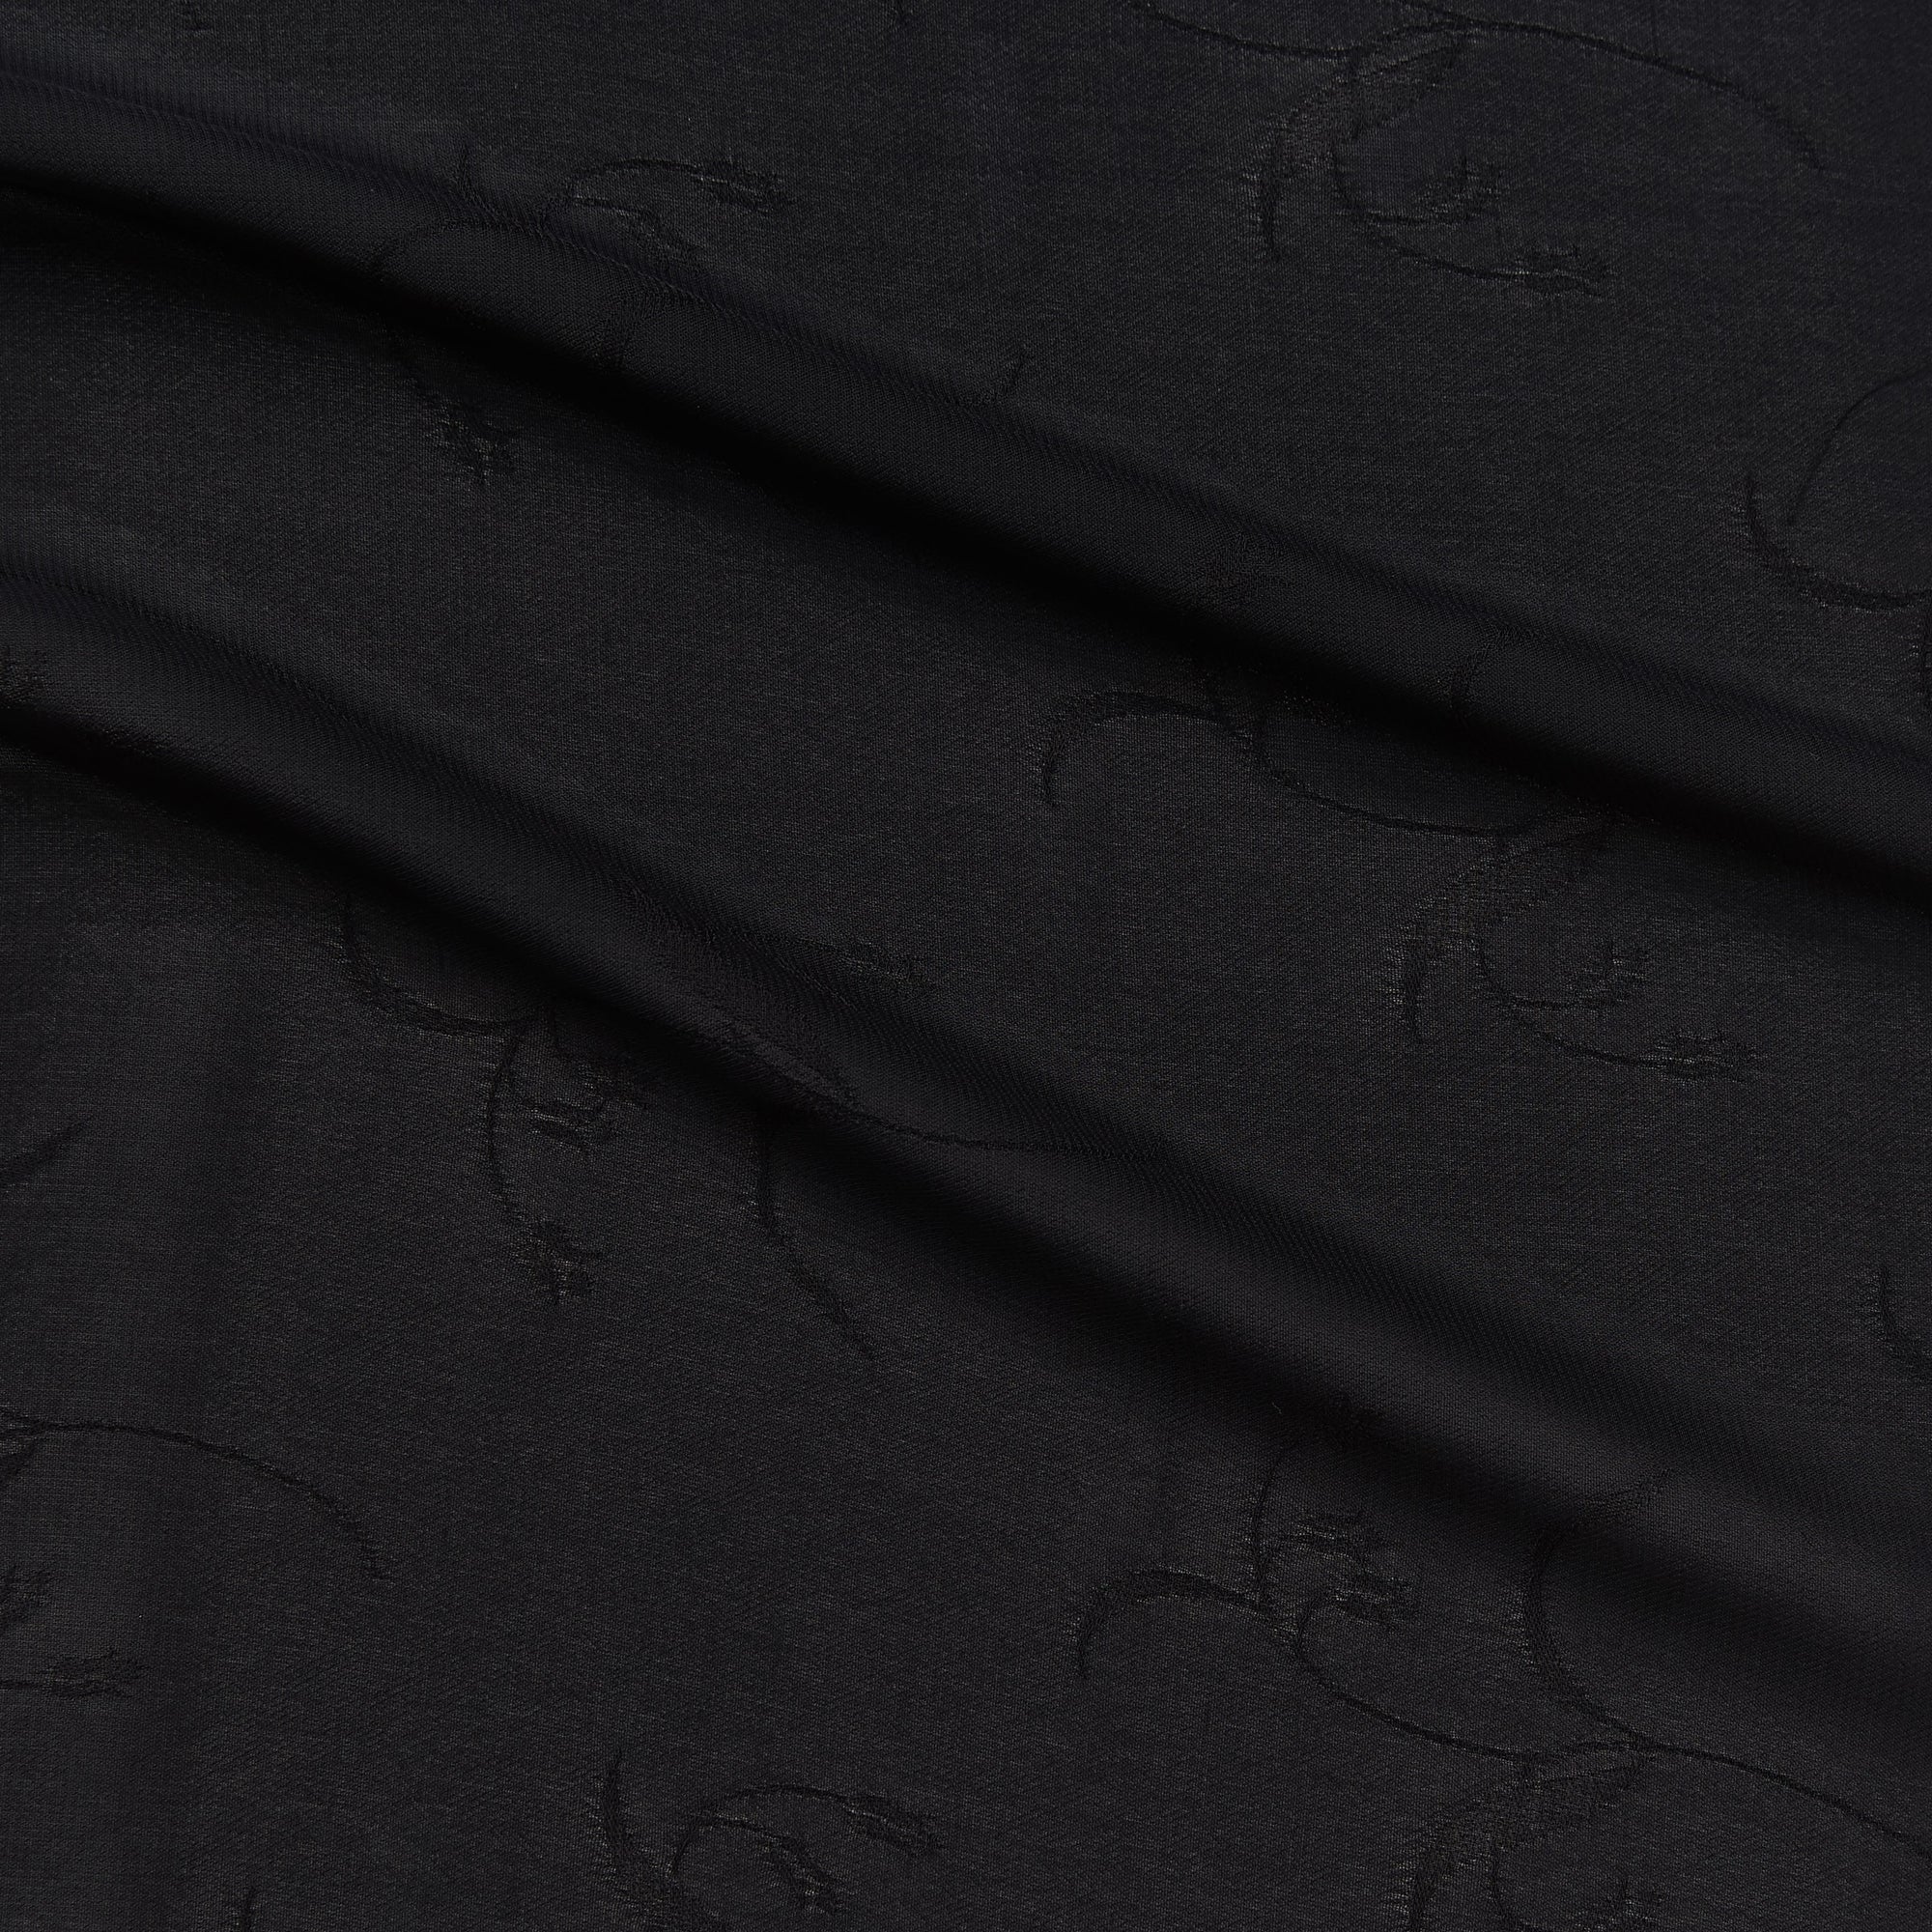 myth displaying the black color version of a light weight floral jacquard pure rayon georgette with good drape